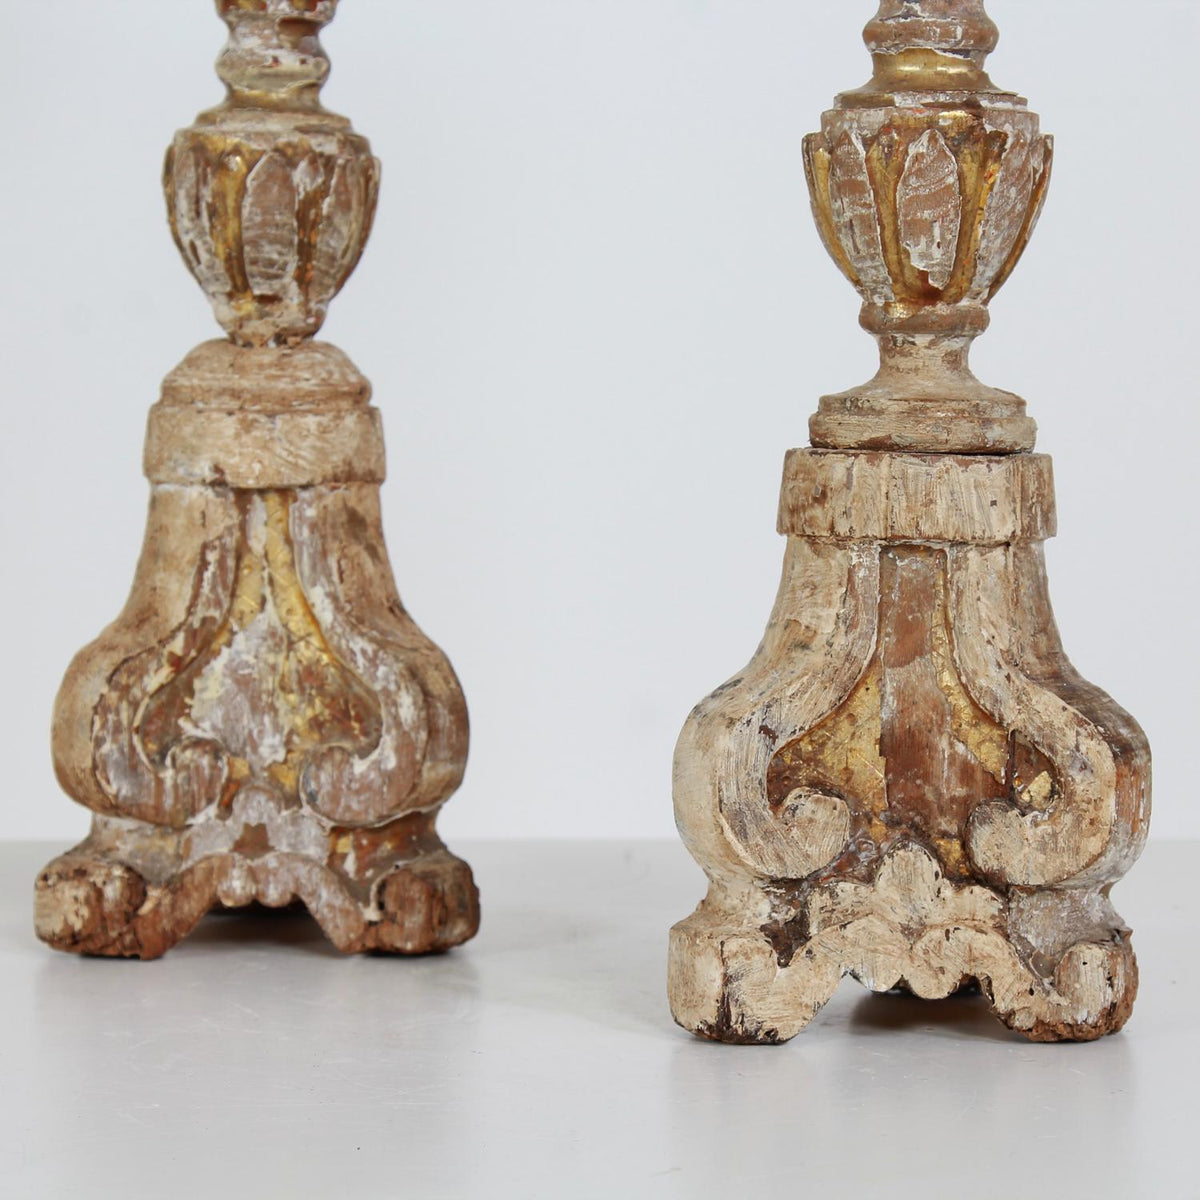 A wonderful Pair of Continental Late 18thC  Pricket Candlesticks